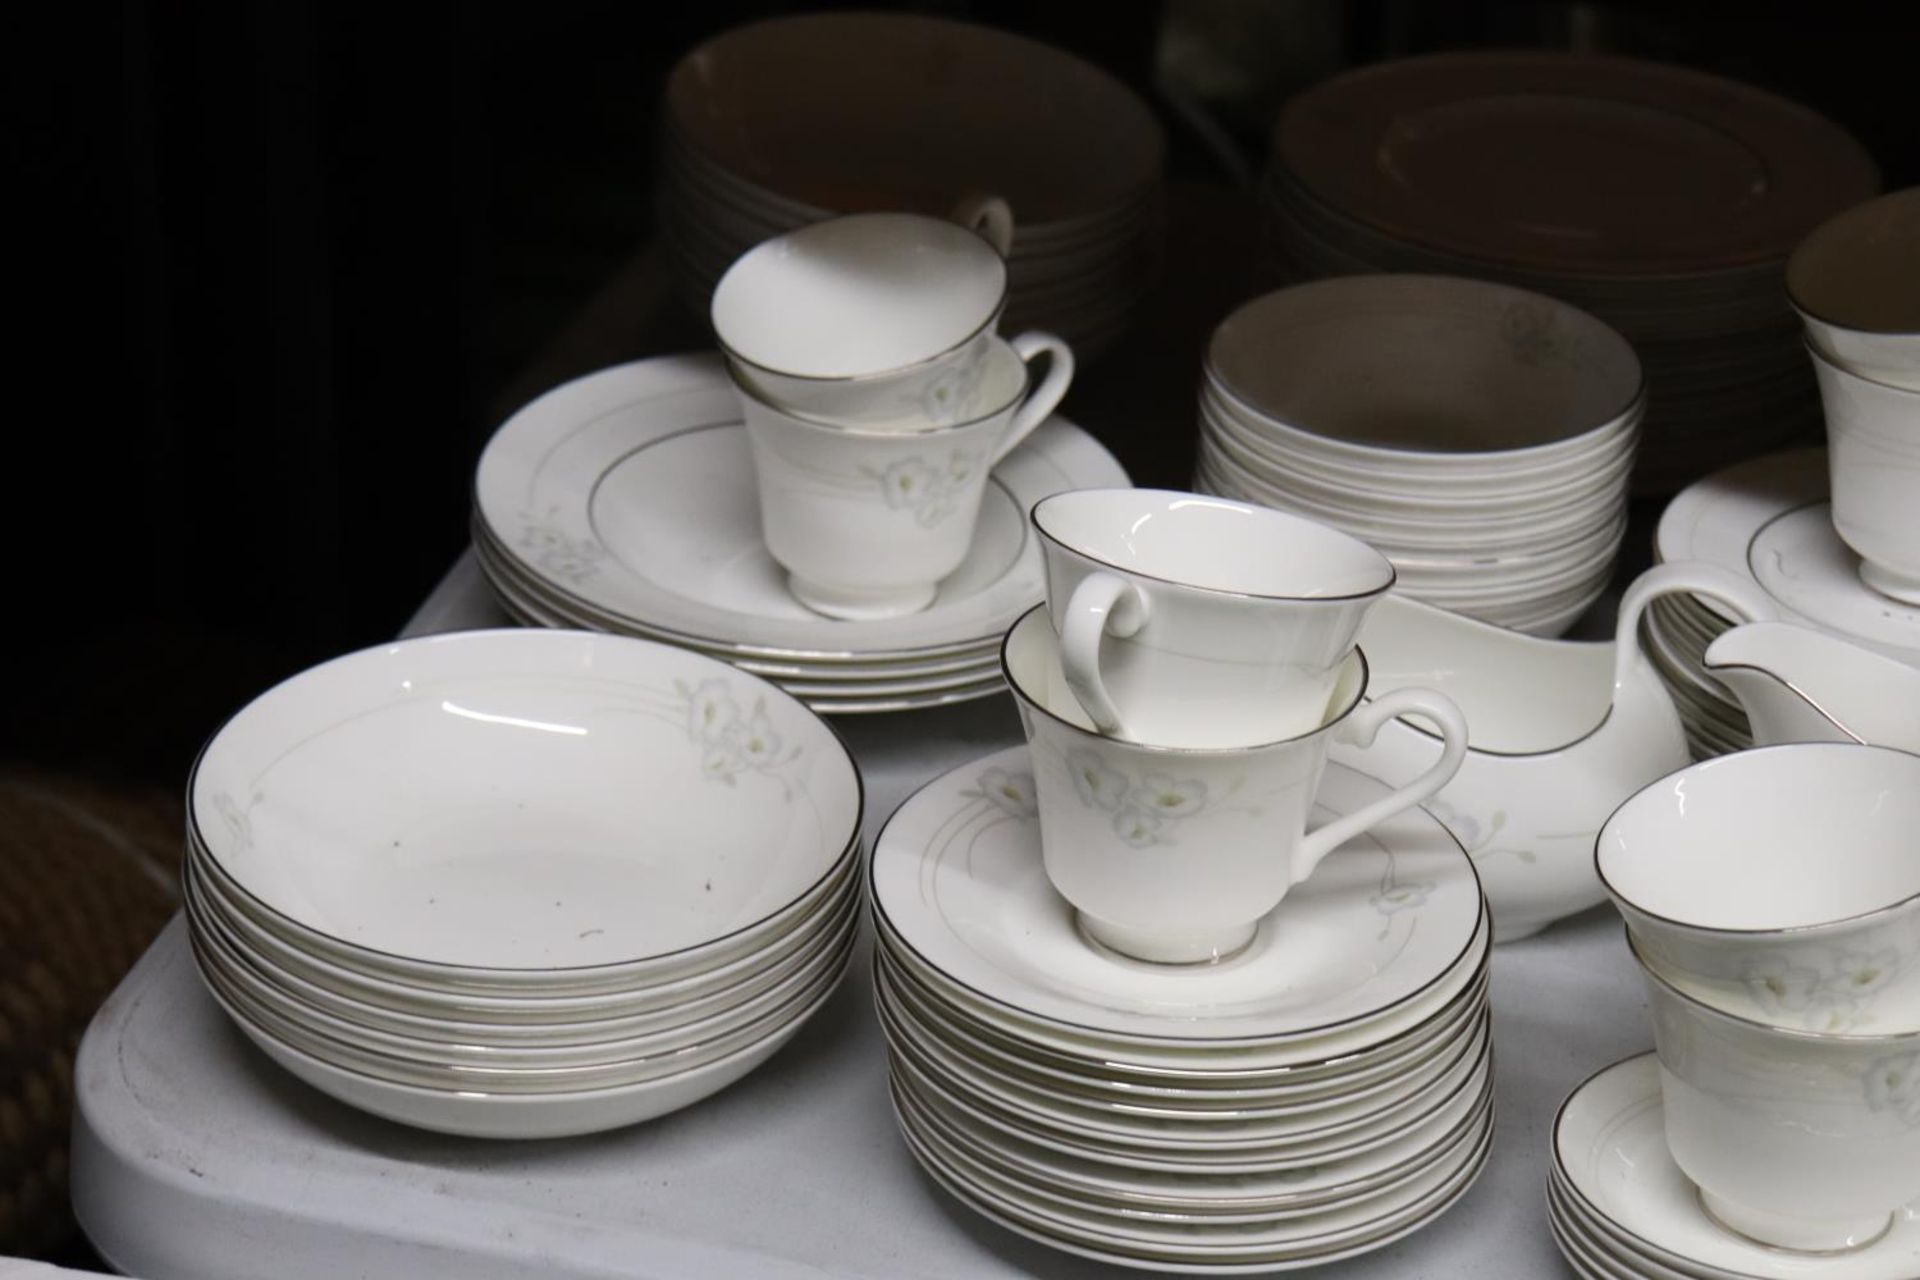 A LARGE QUANTITY OF ROYAL DOULTON "MYSTIQUE" TO INCLUDE DINNER PATES, SAUCE BOAT, SERVING BOWLS, - Image 2 of 5